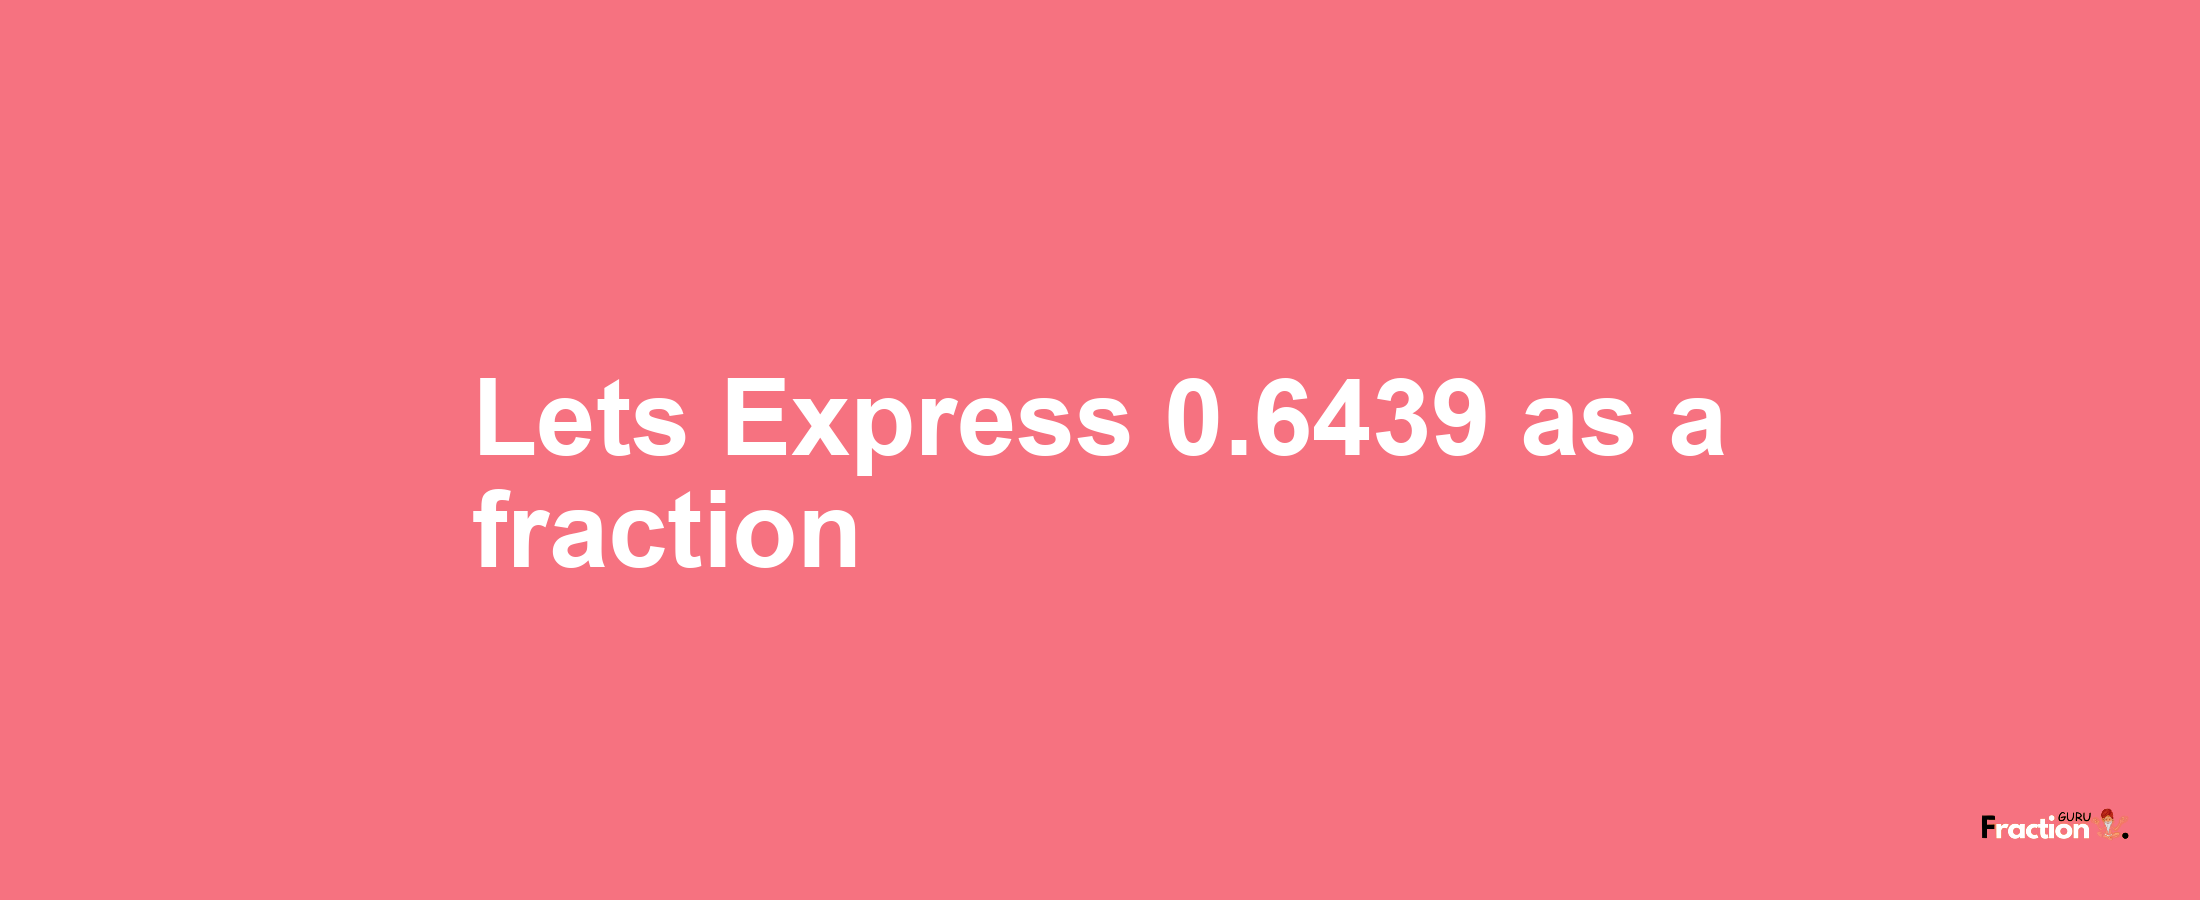 Lets Express 0.6439 as afraction